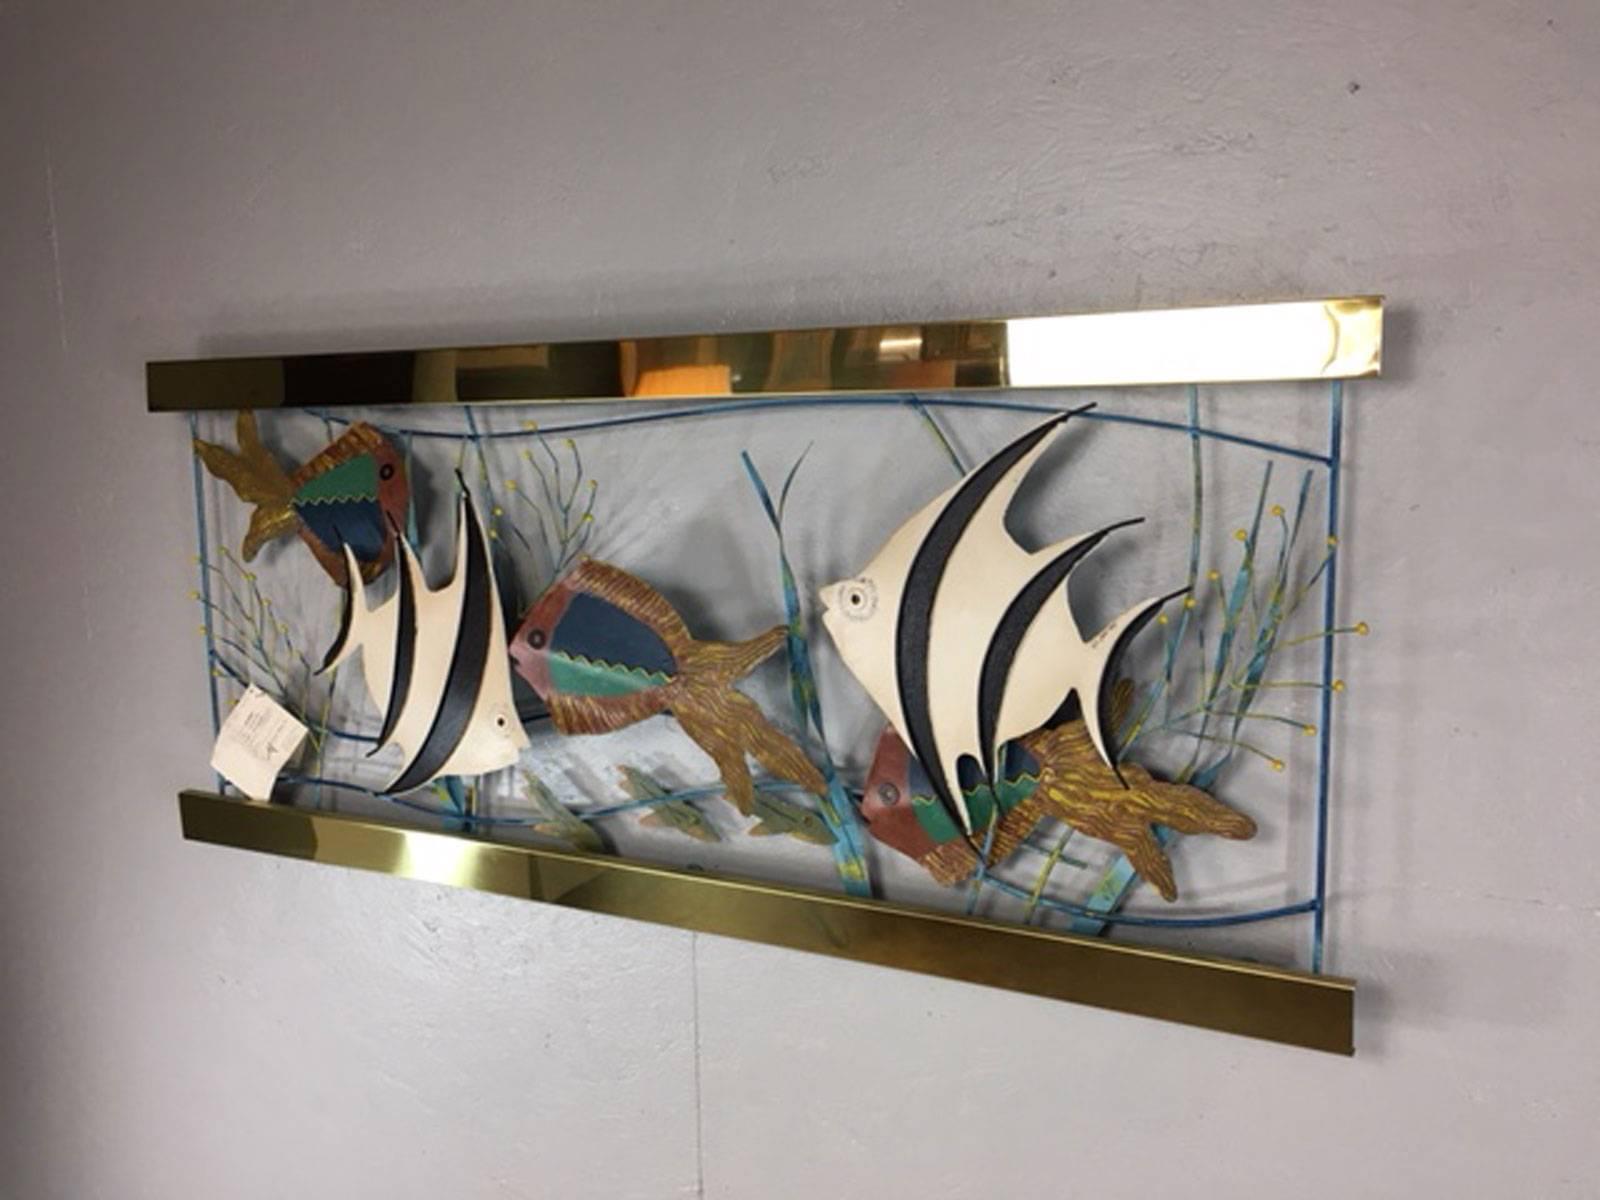 Mixed Metal Aquarium Fish Wall Sculpture by Curtis Jere In Excellent Condition For Sale In Phoenix, AZ